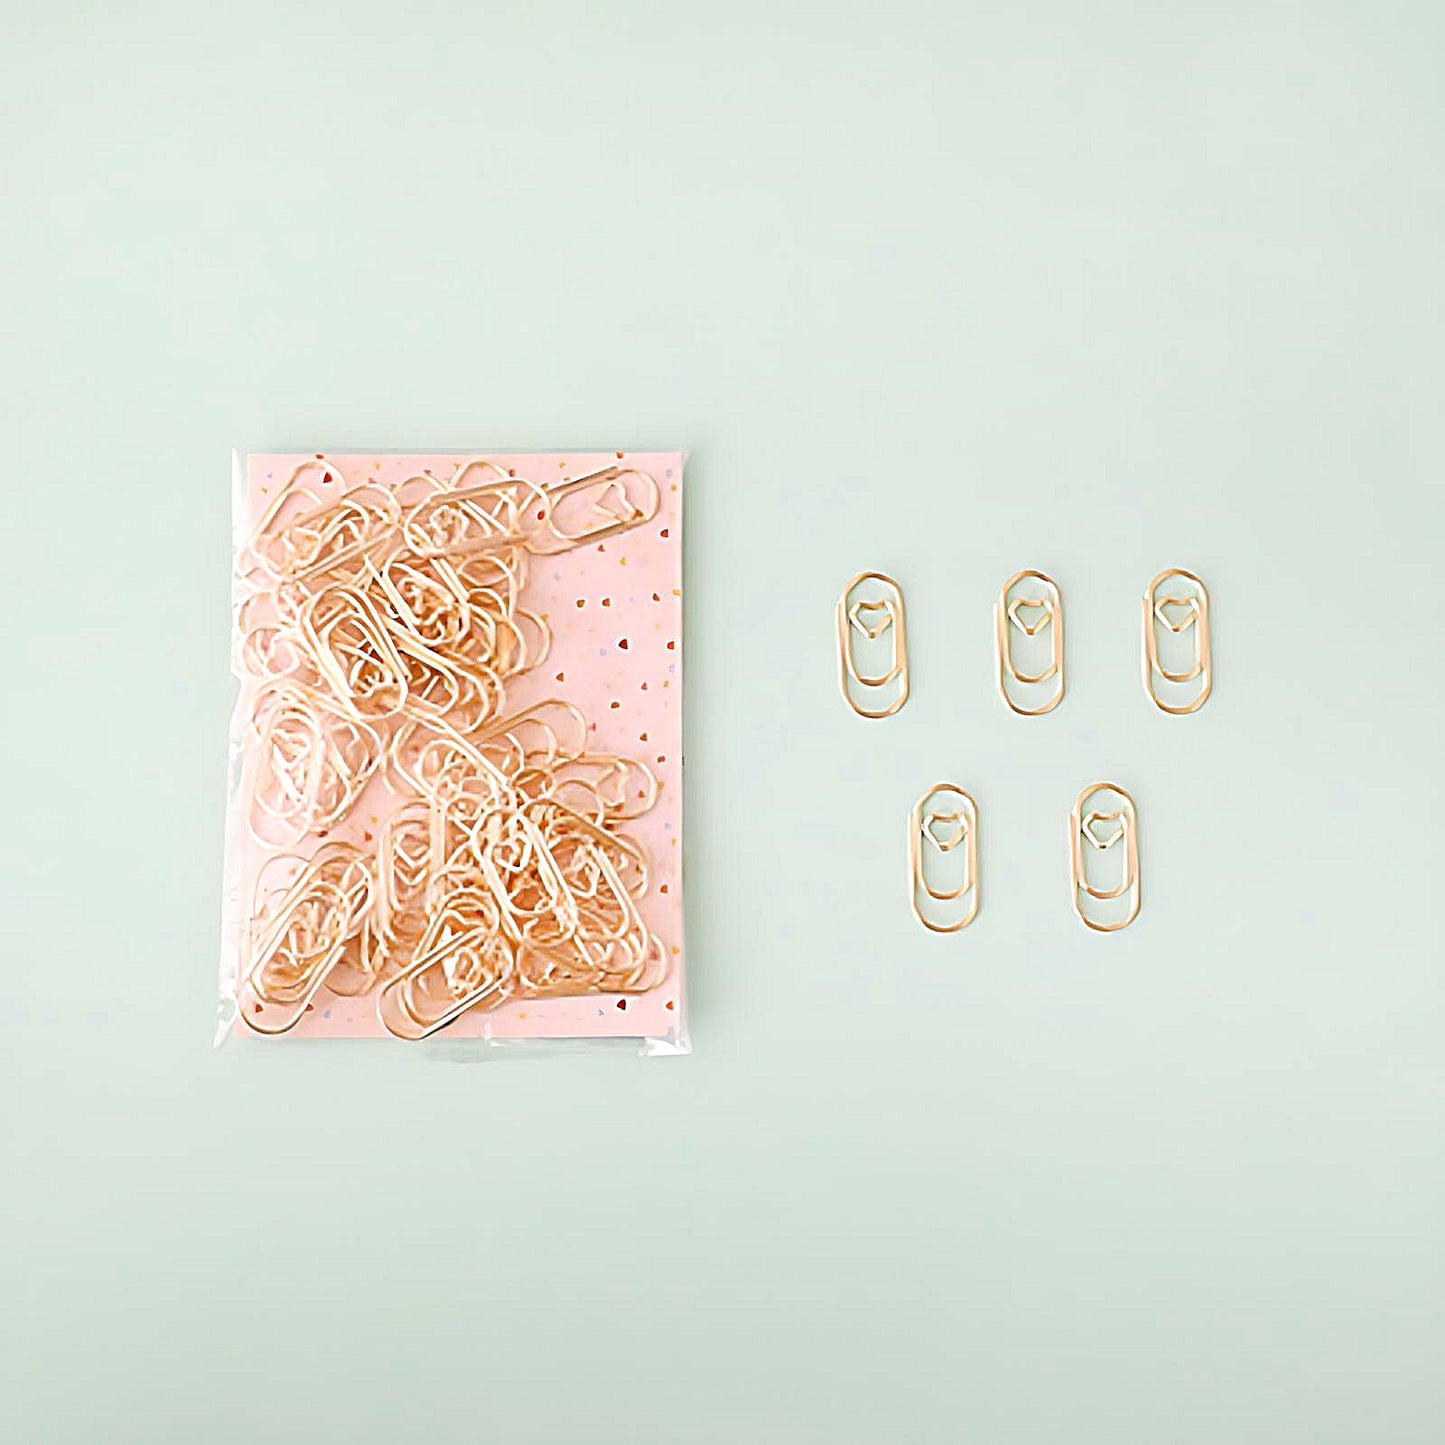 five mini paper clips beside a pack of gold paper clips